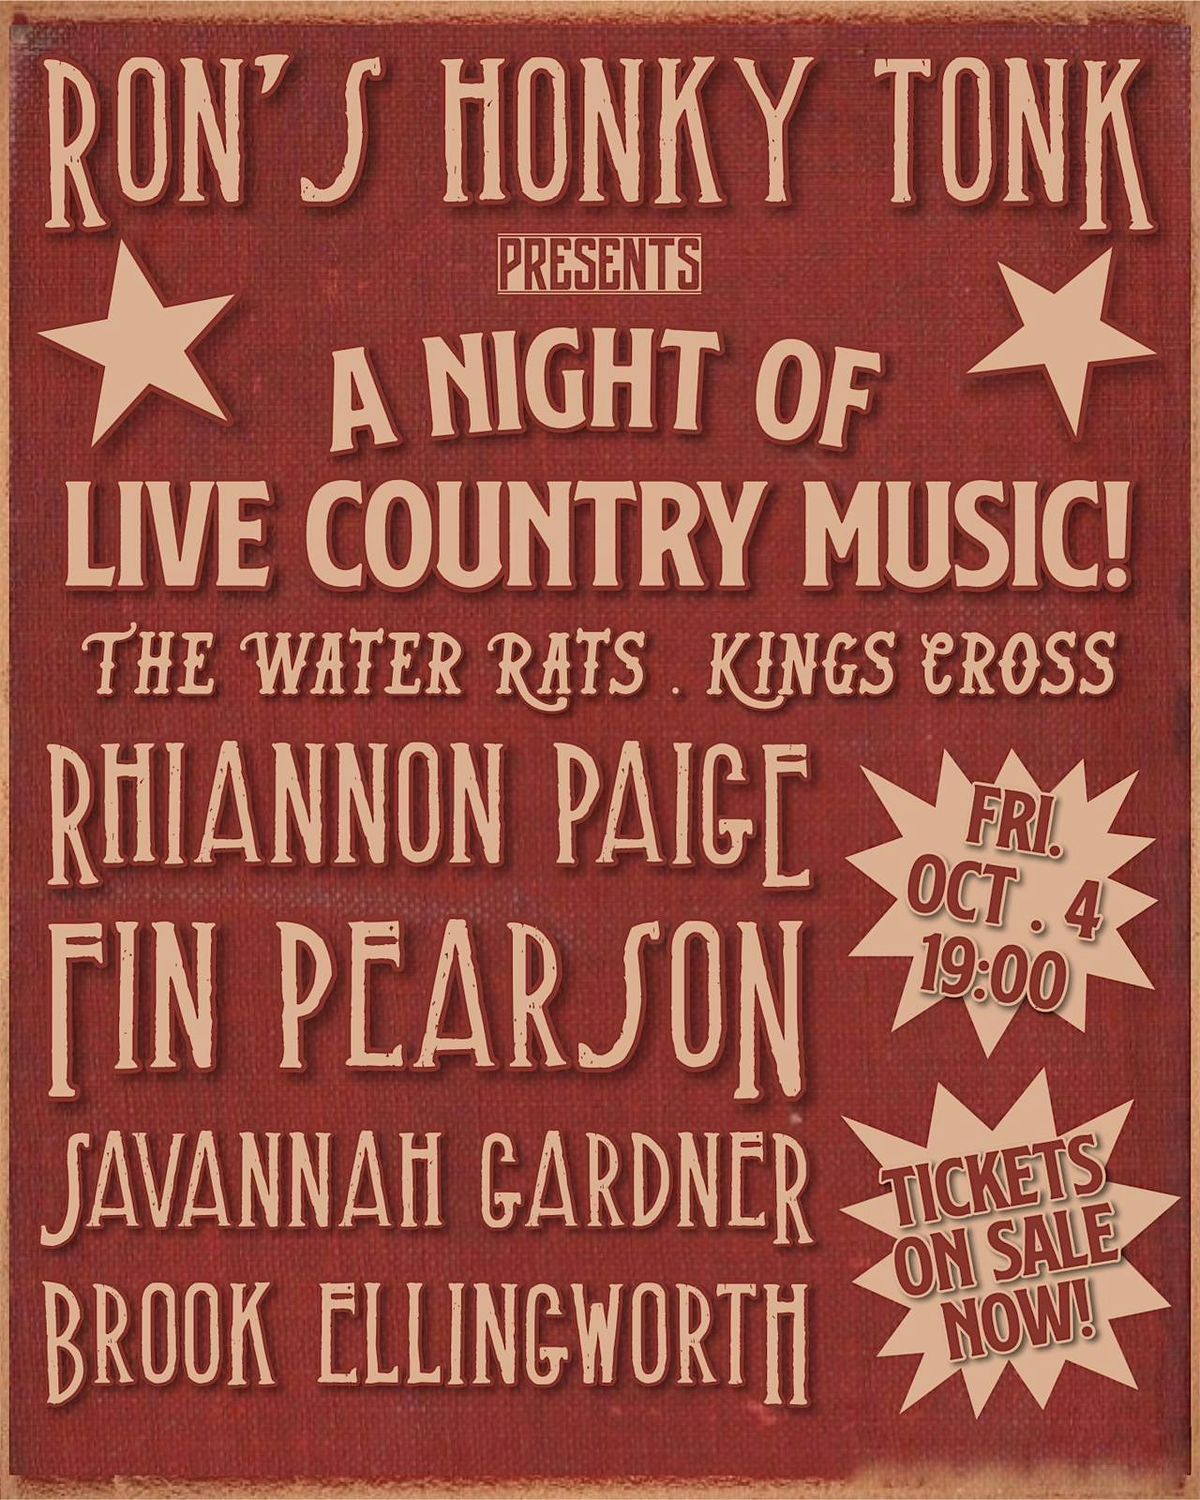 Ron's Honky Tonk - A night of live country music